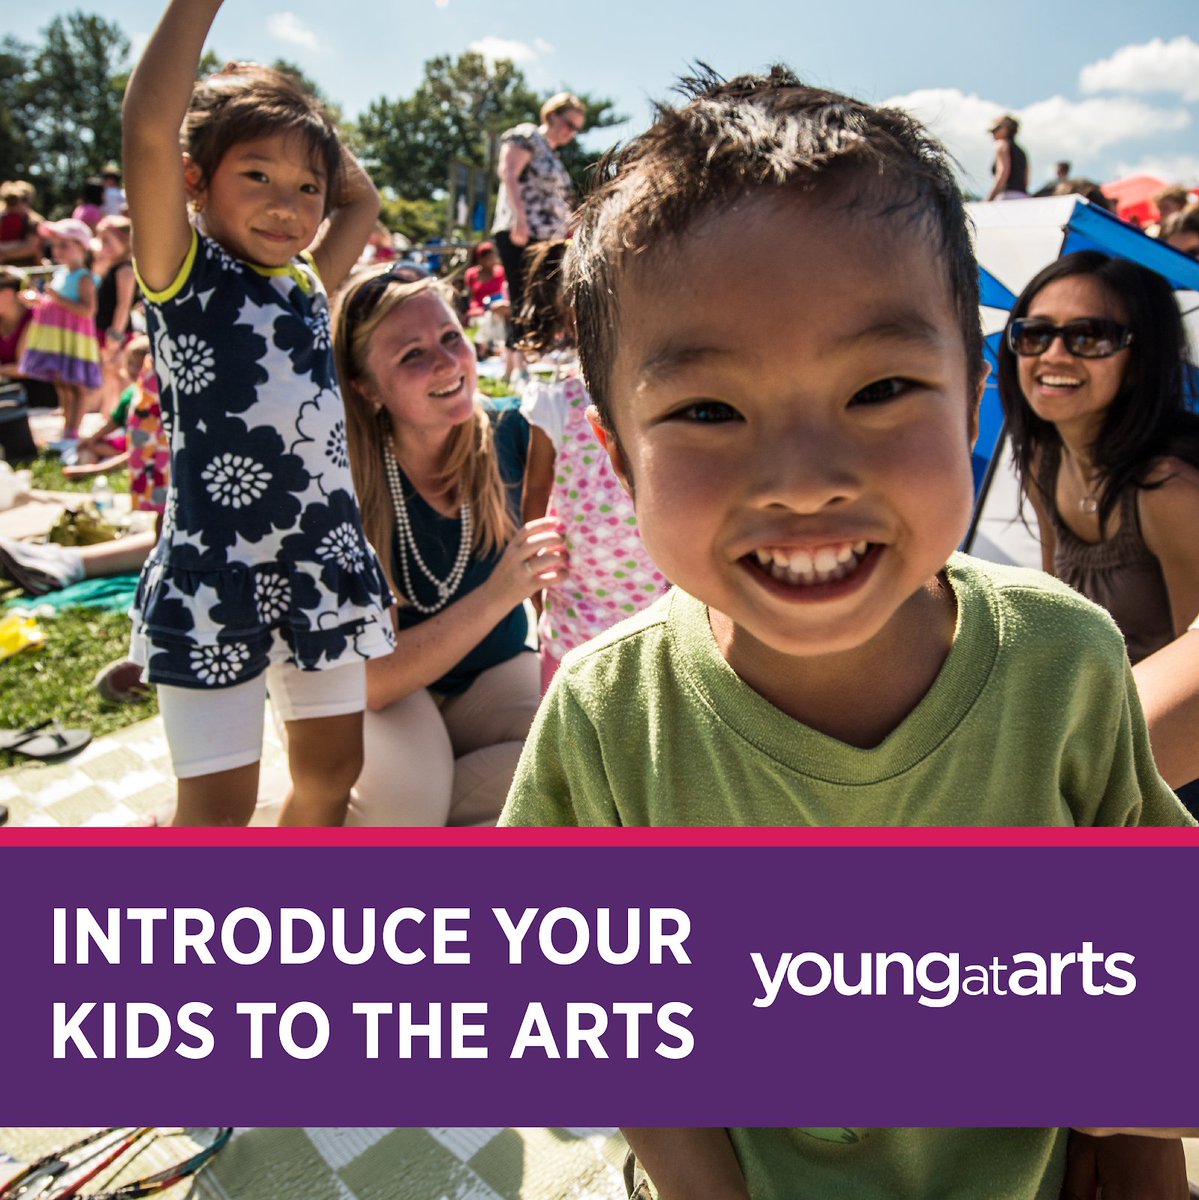 JUST ANNOUNCED: Experience the magic of live performances with your family for free! → wolftrap.org/youngatarts Get a complimentary kids ticket for each adult ticket purchased for select performances. Check out the lineup today!